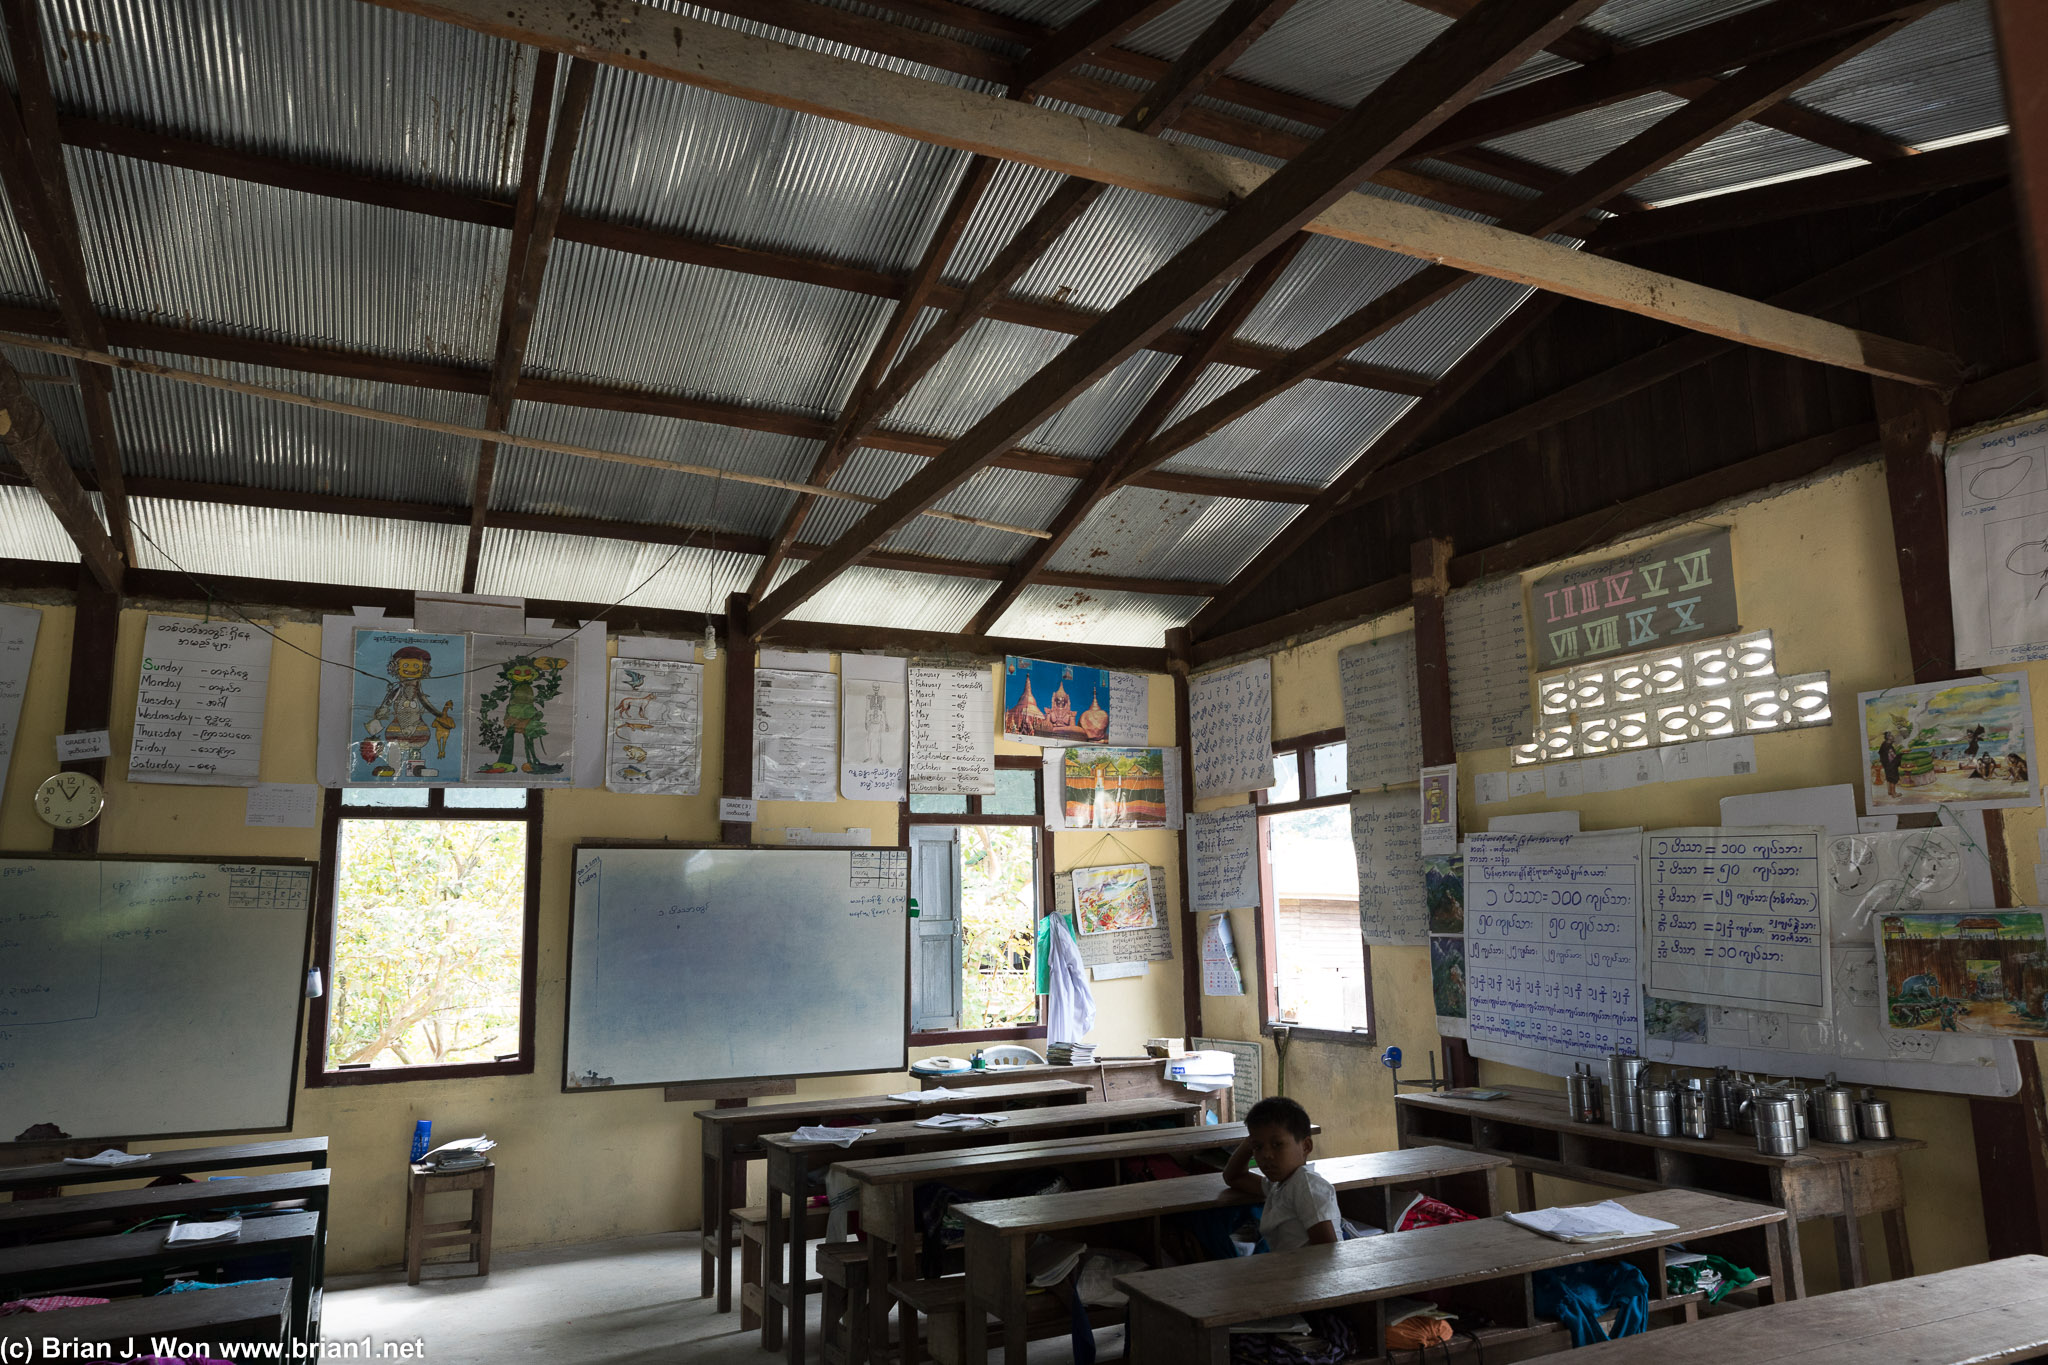 Inside one of the schoolrooms.